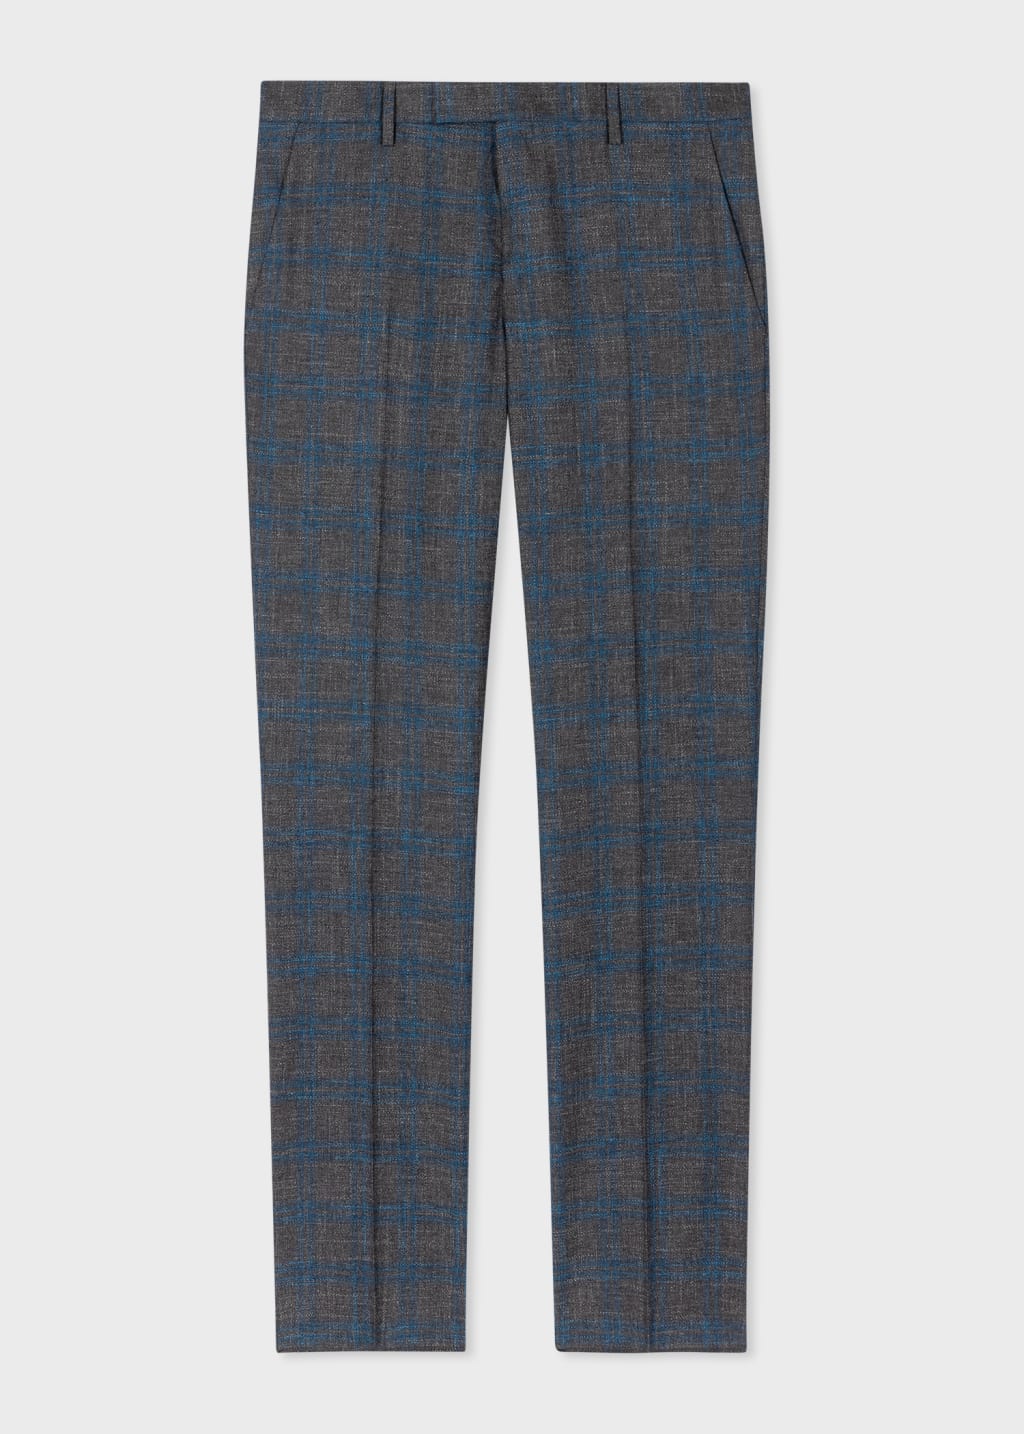 Product View - Slim-Fit Grey and Blue Check Wool-Linen Trousers by Paul Smith